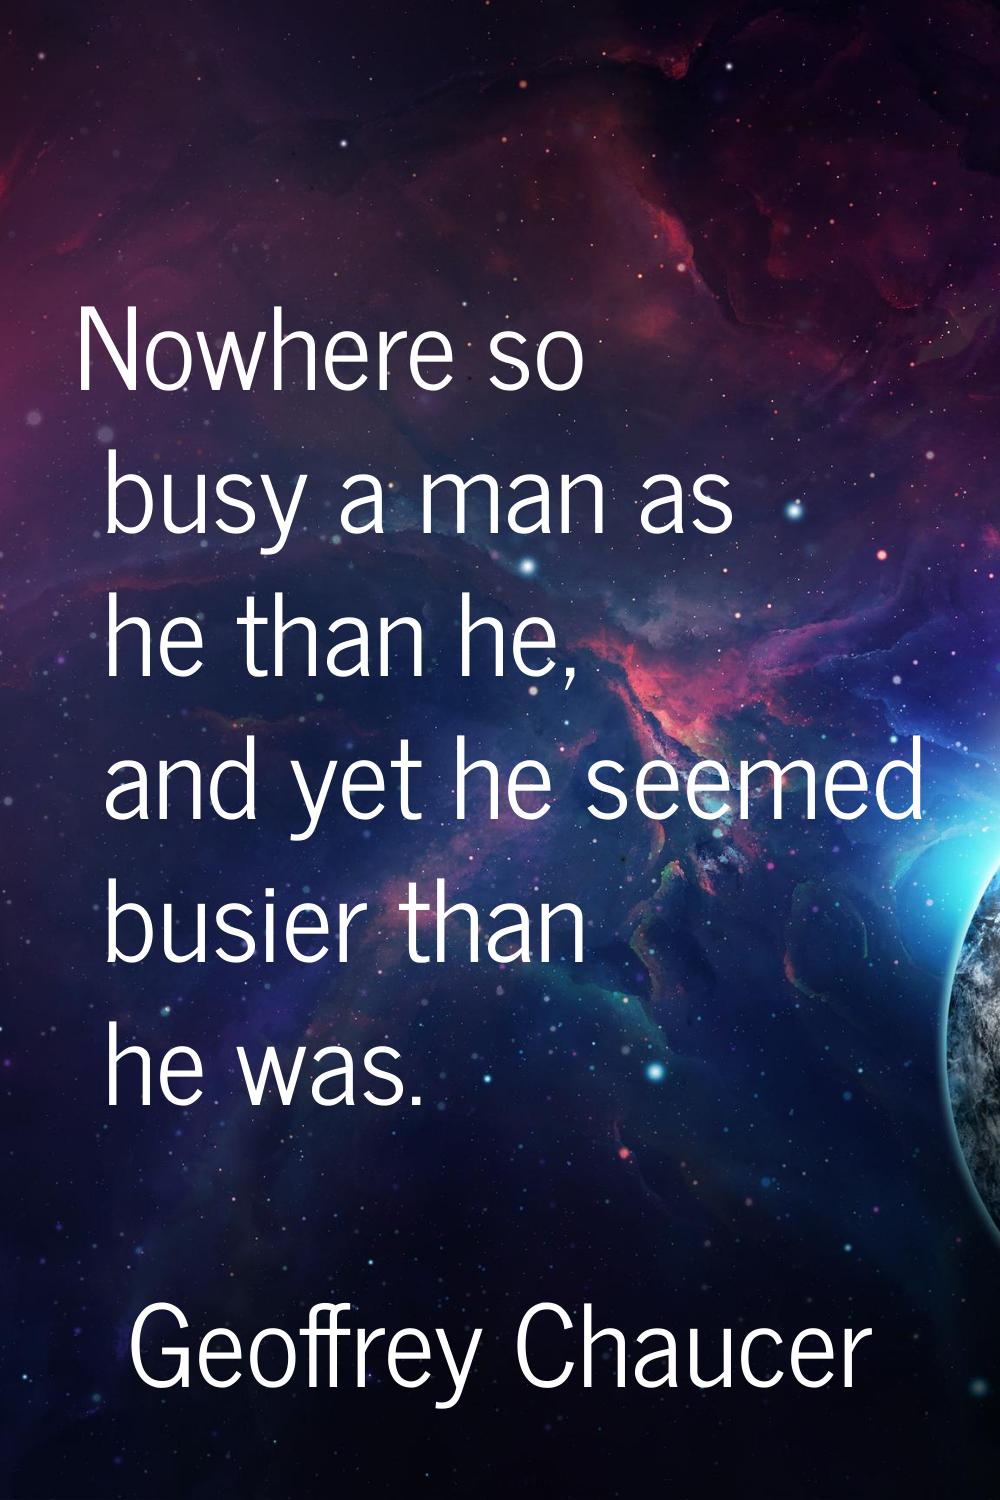 Nowhere so busy a man as he than he, and yet he seemed busier than he was.